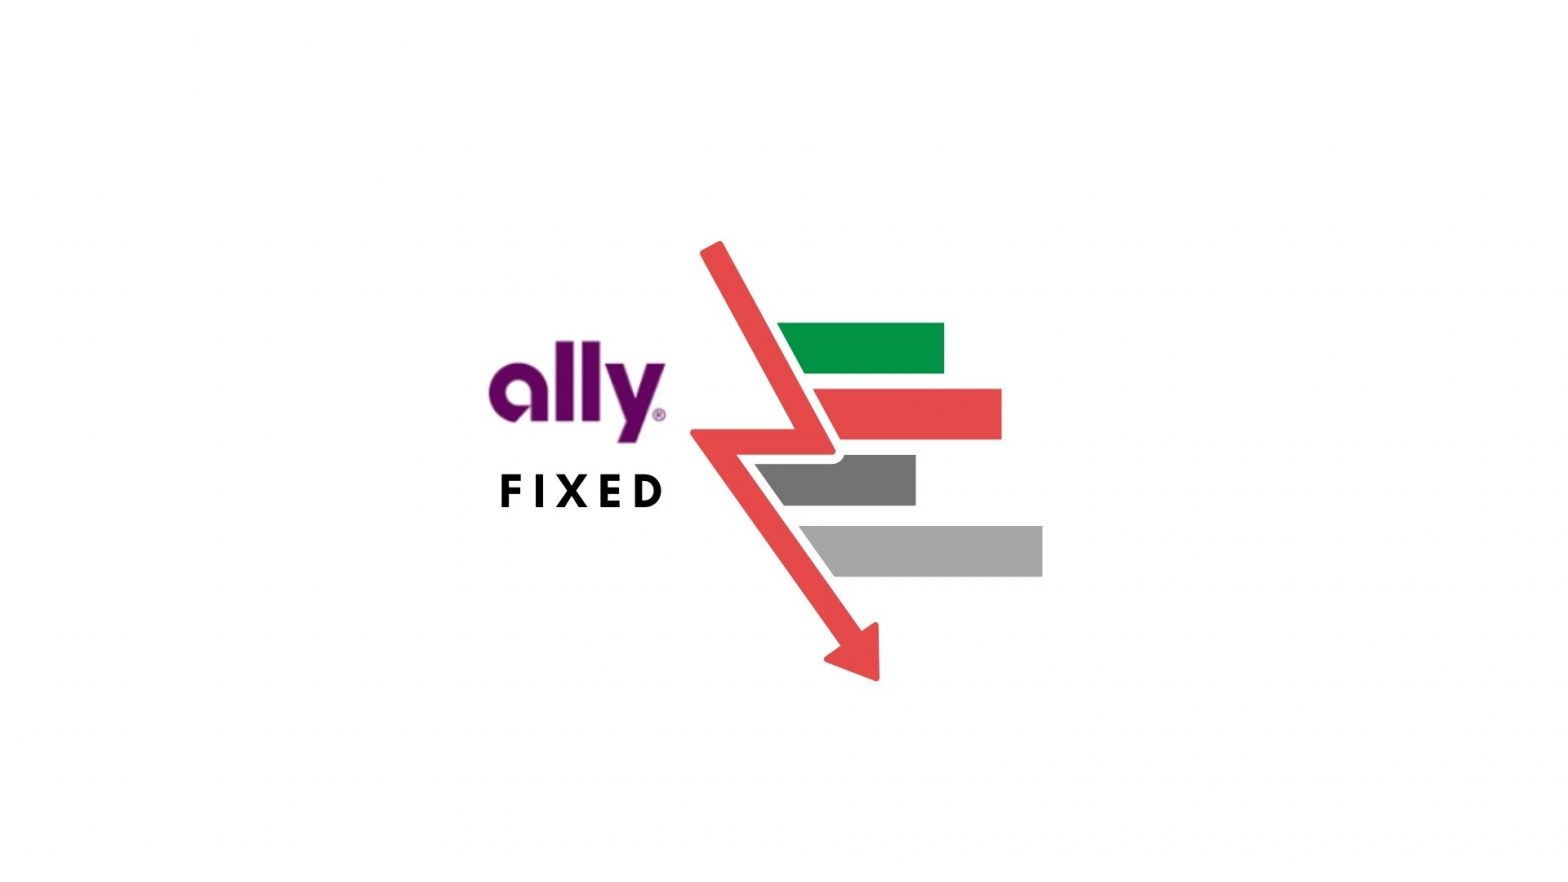 ally app not working